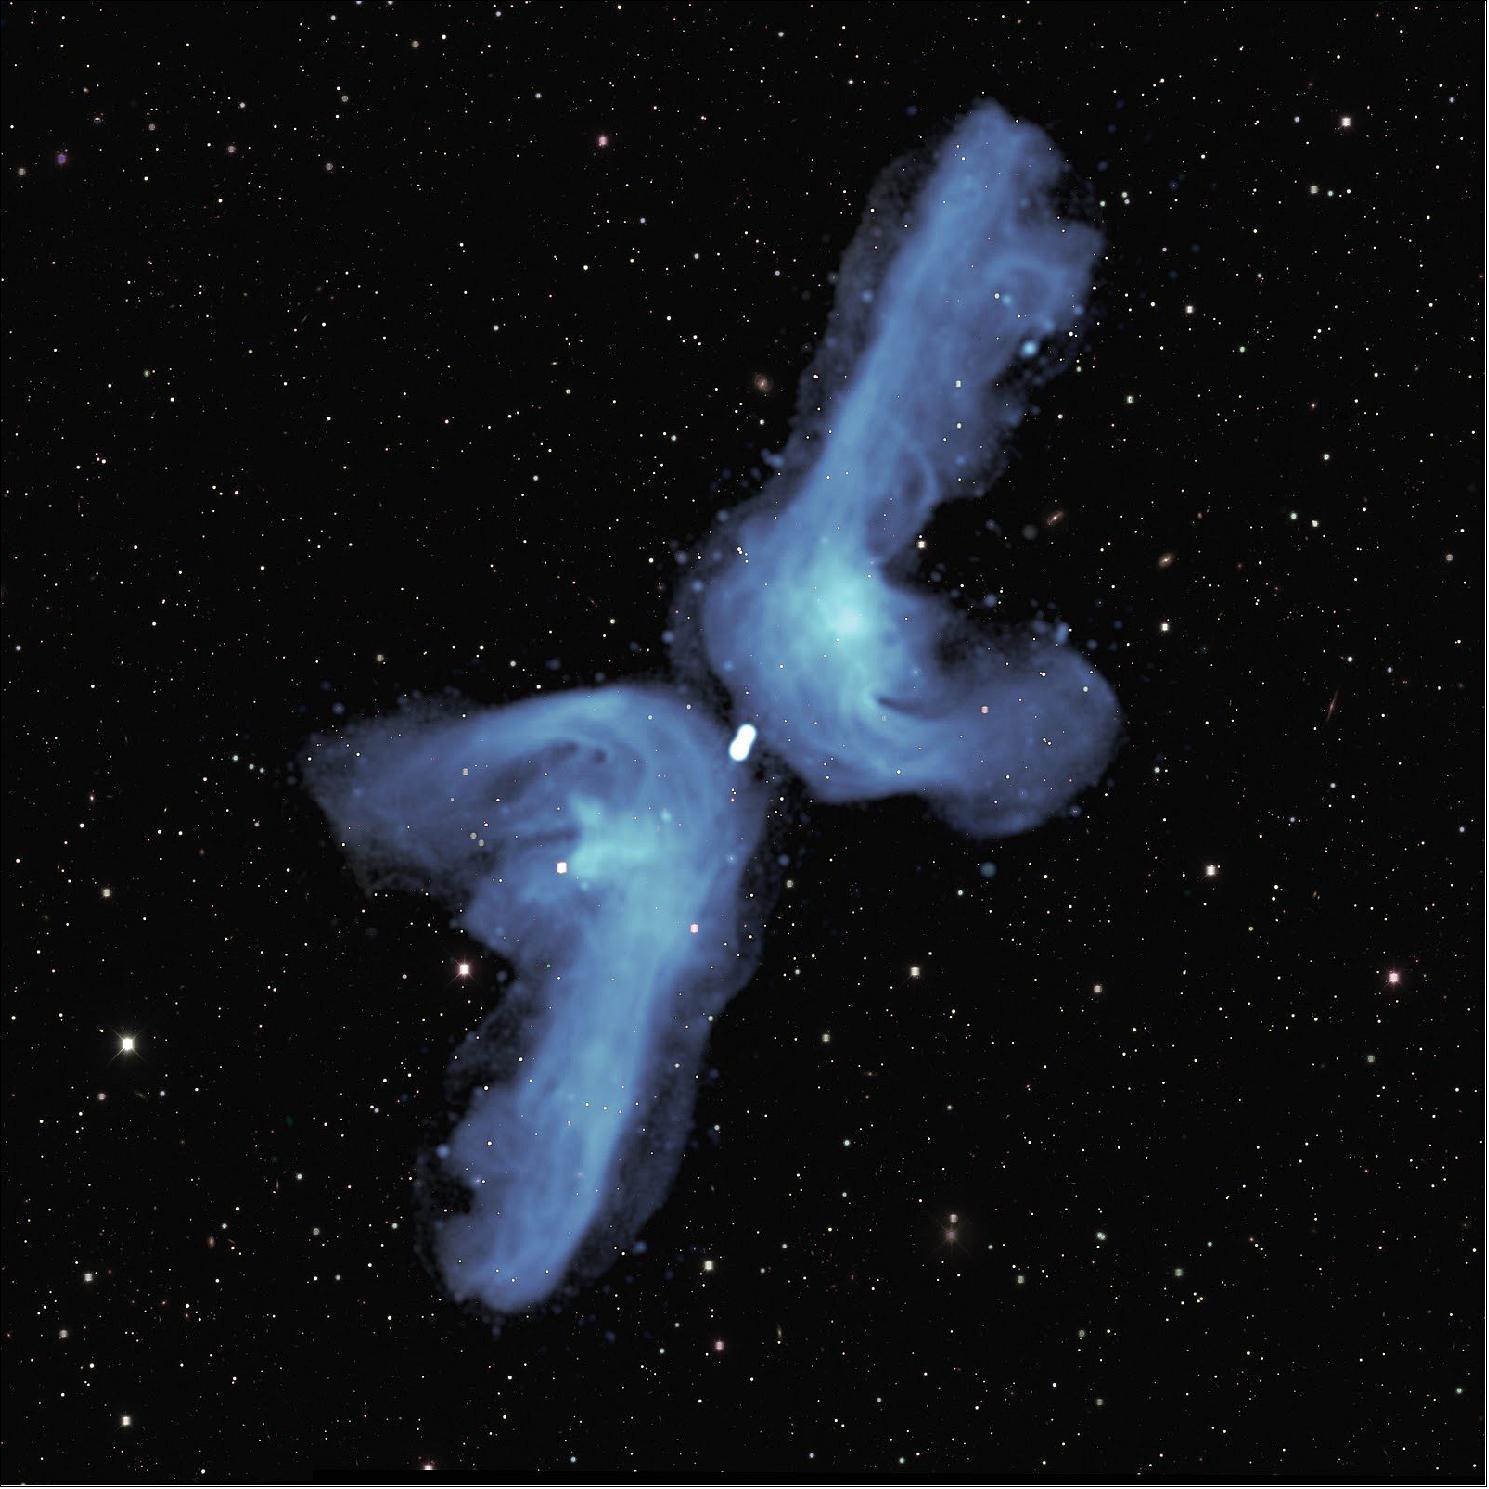 Figure 72: The galaxy PKS 2014-55, located 800 million light years from Earth, is classified as ‘X-shaped’ because of its appearance in previous relatively blurry images. The detail provided in this radio image obtained with the MeerKAT telescope indicates that its shape is best described as a ‘double boomerang’. Two powerful jets of radio waves, indicated in blue color, each extend 2.5 million light years into space (comparable to the distance between the Milky Way and the Andromeda galaxy, our nearest major neighbor). Eventually, they are ‘turned back’ by the pressure of tenuous intergalactic gas. As they flow back towards the central galaxy, they are deflected by its relatively high gas pressure into the shorter, horizontal, arms of the boomerang. The background image shows visible light from myriad galaxies in the distant universe. Adapted from W Cotton et al, MNRAS (2020), image credit: NRAO/AUI/NSF; SARAO; DES